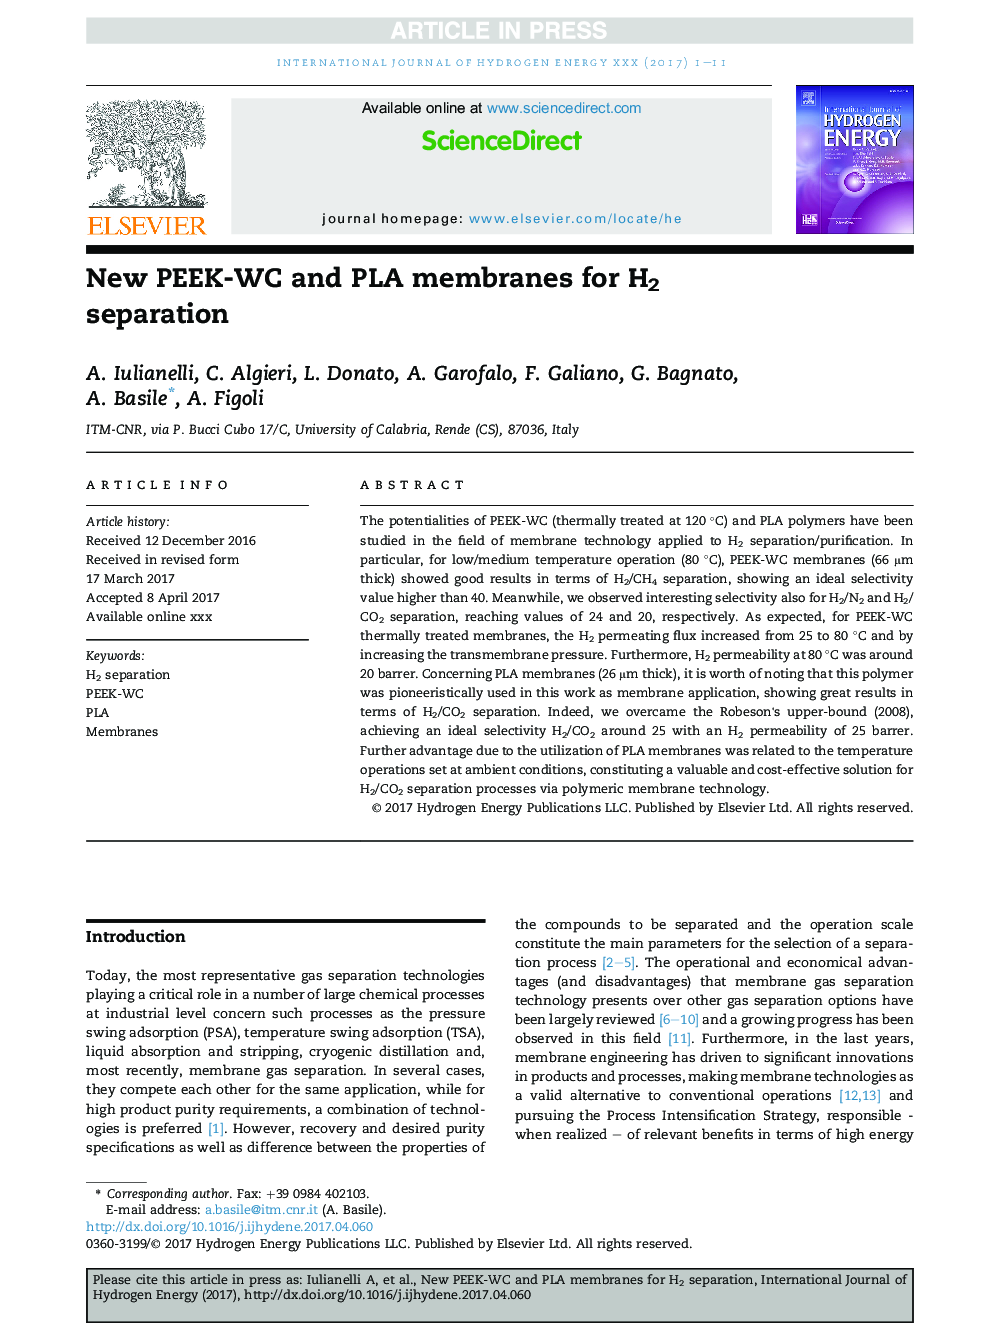 New PEEK-WC and PLA membranes for H2 separation